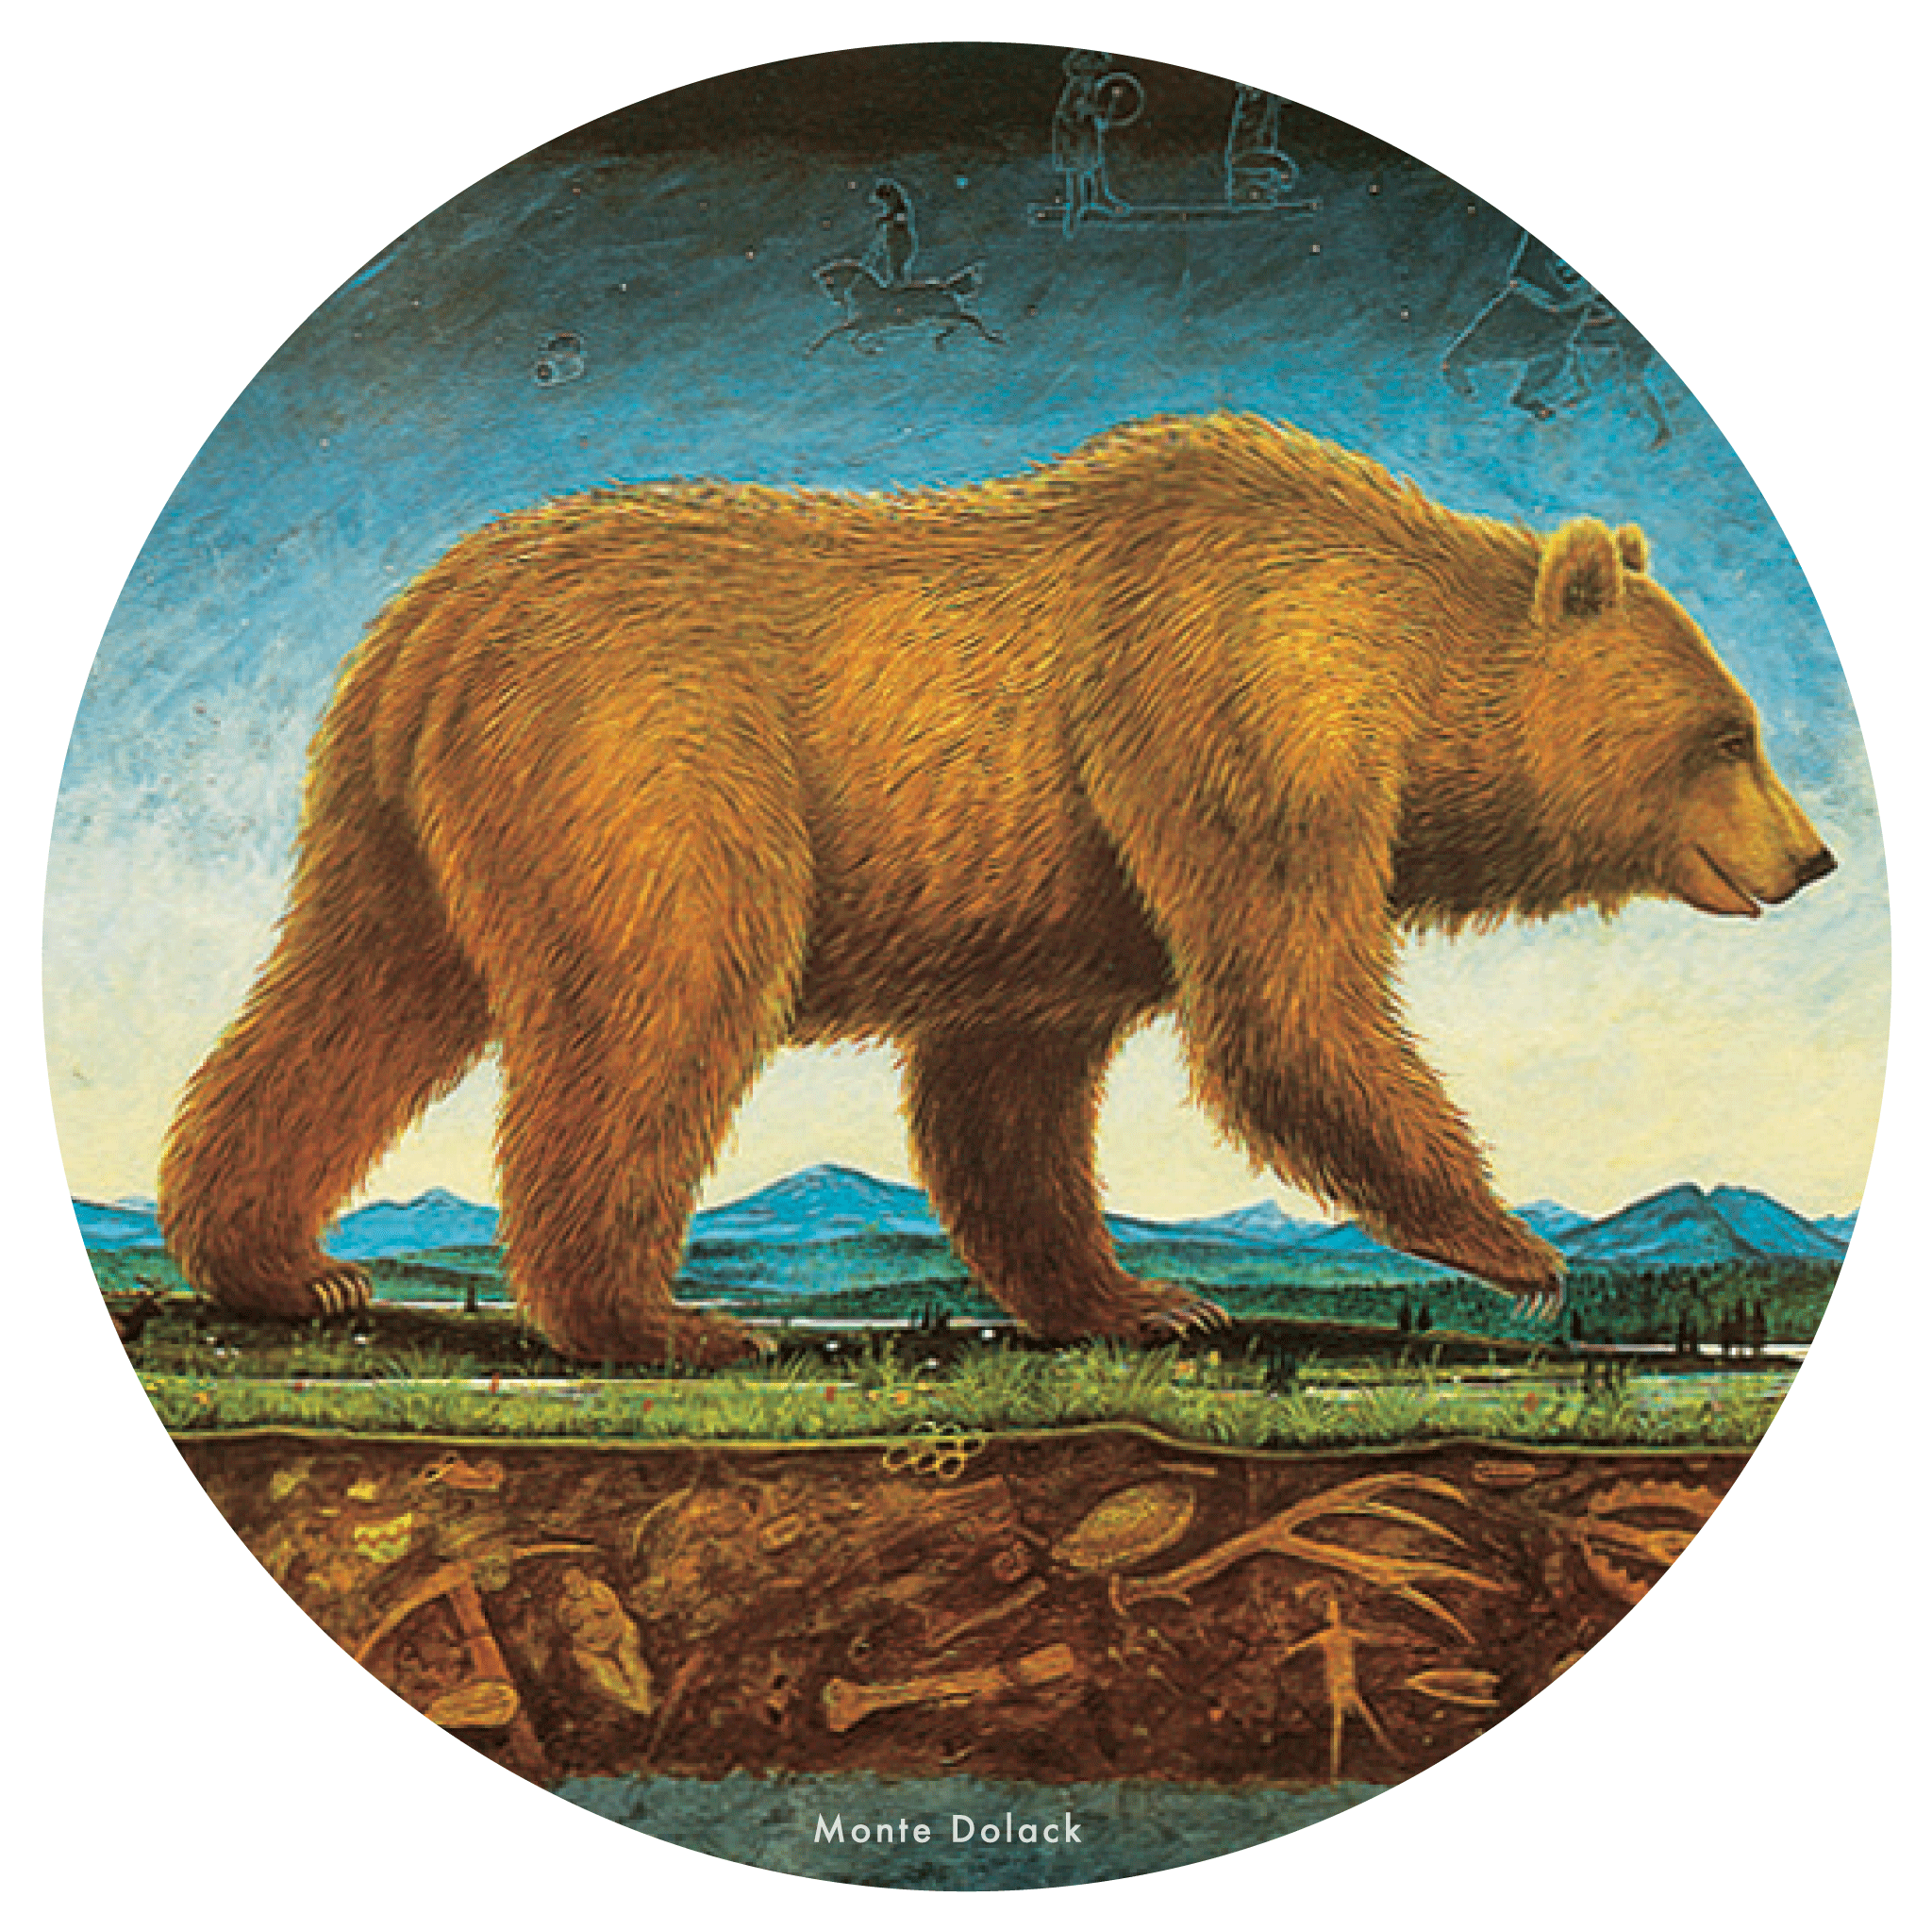 Illustration of a Grizzly Bear showing the sky and earth